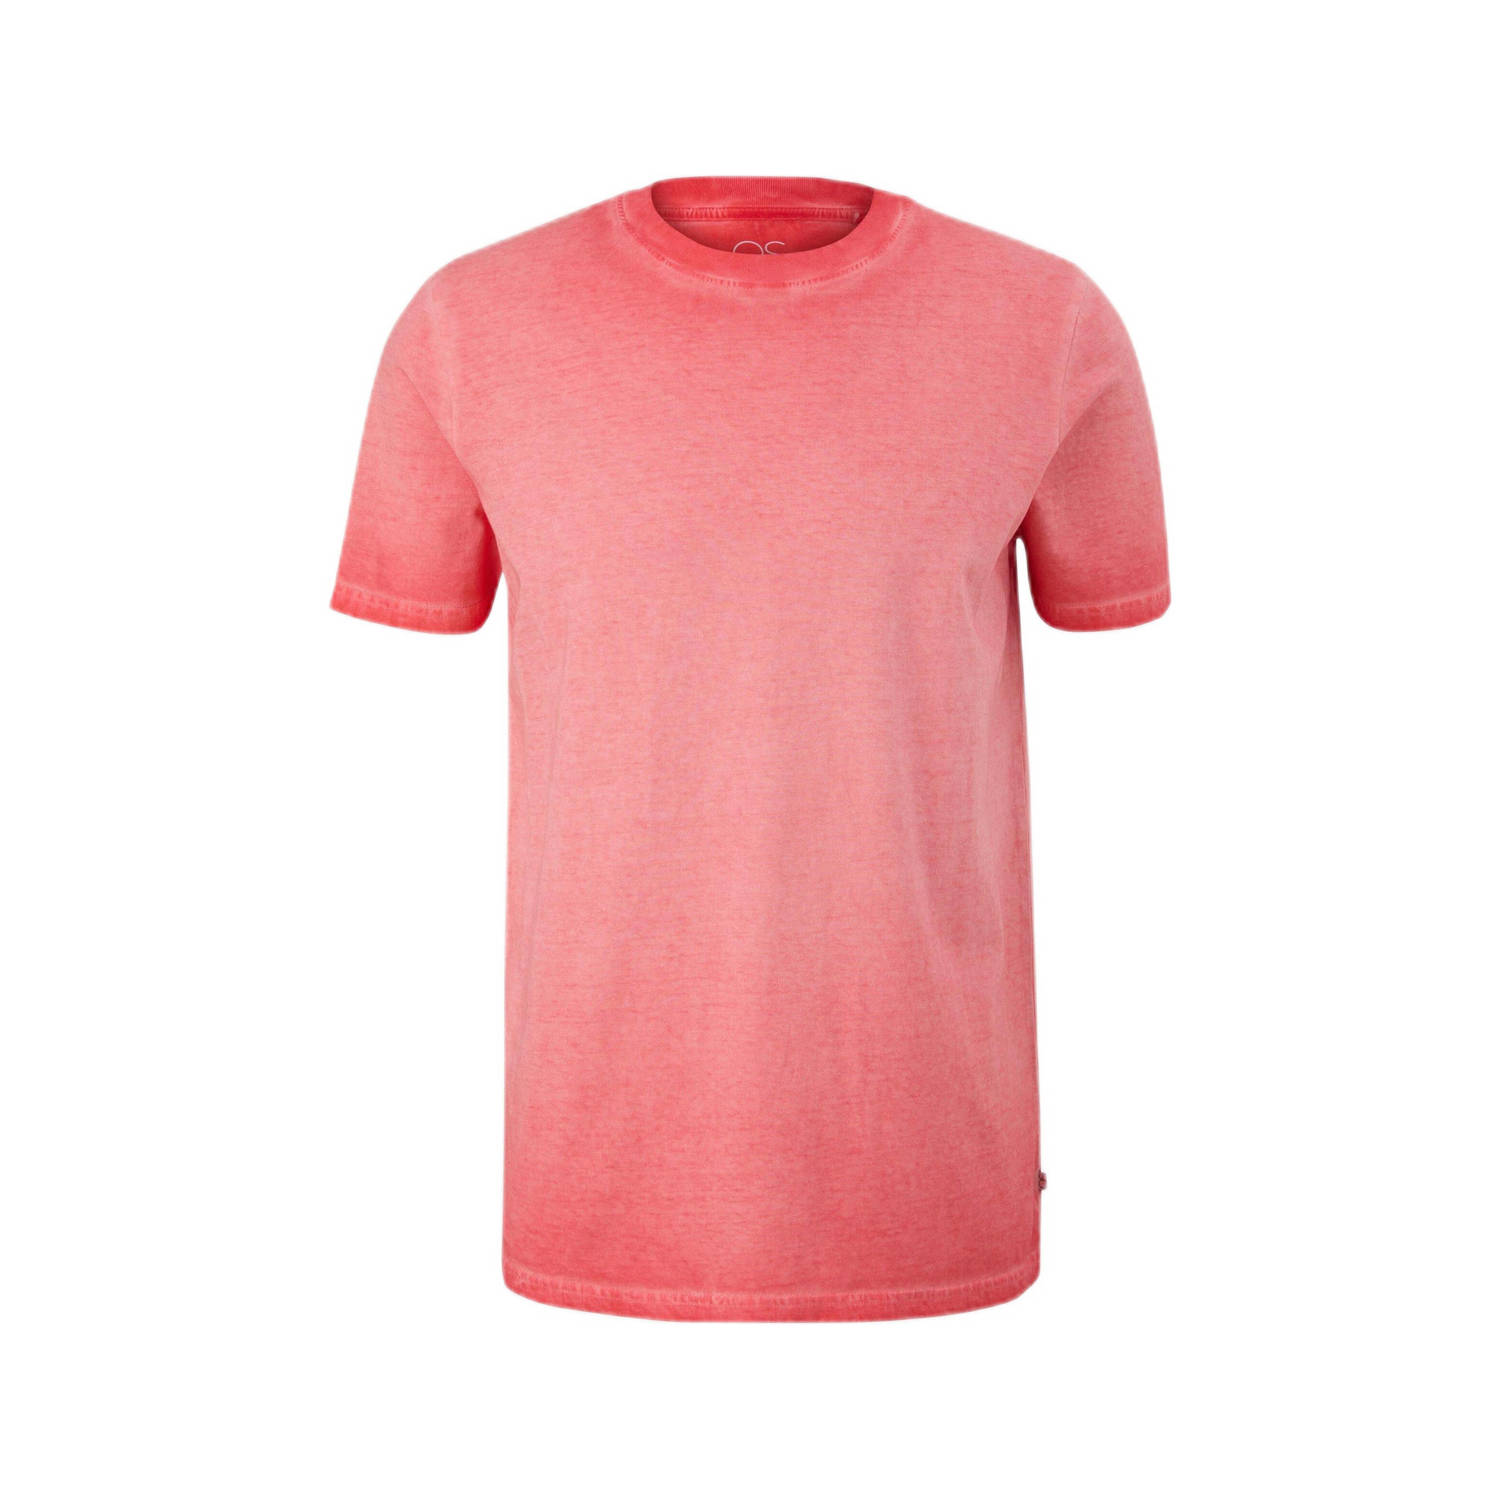 Q S by s.Oliver regular fit T-shirt zalm